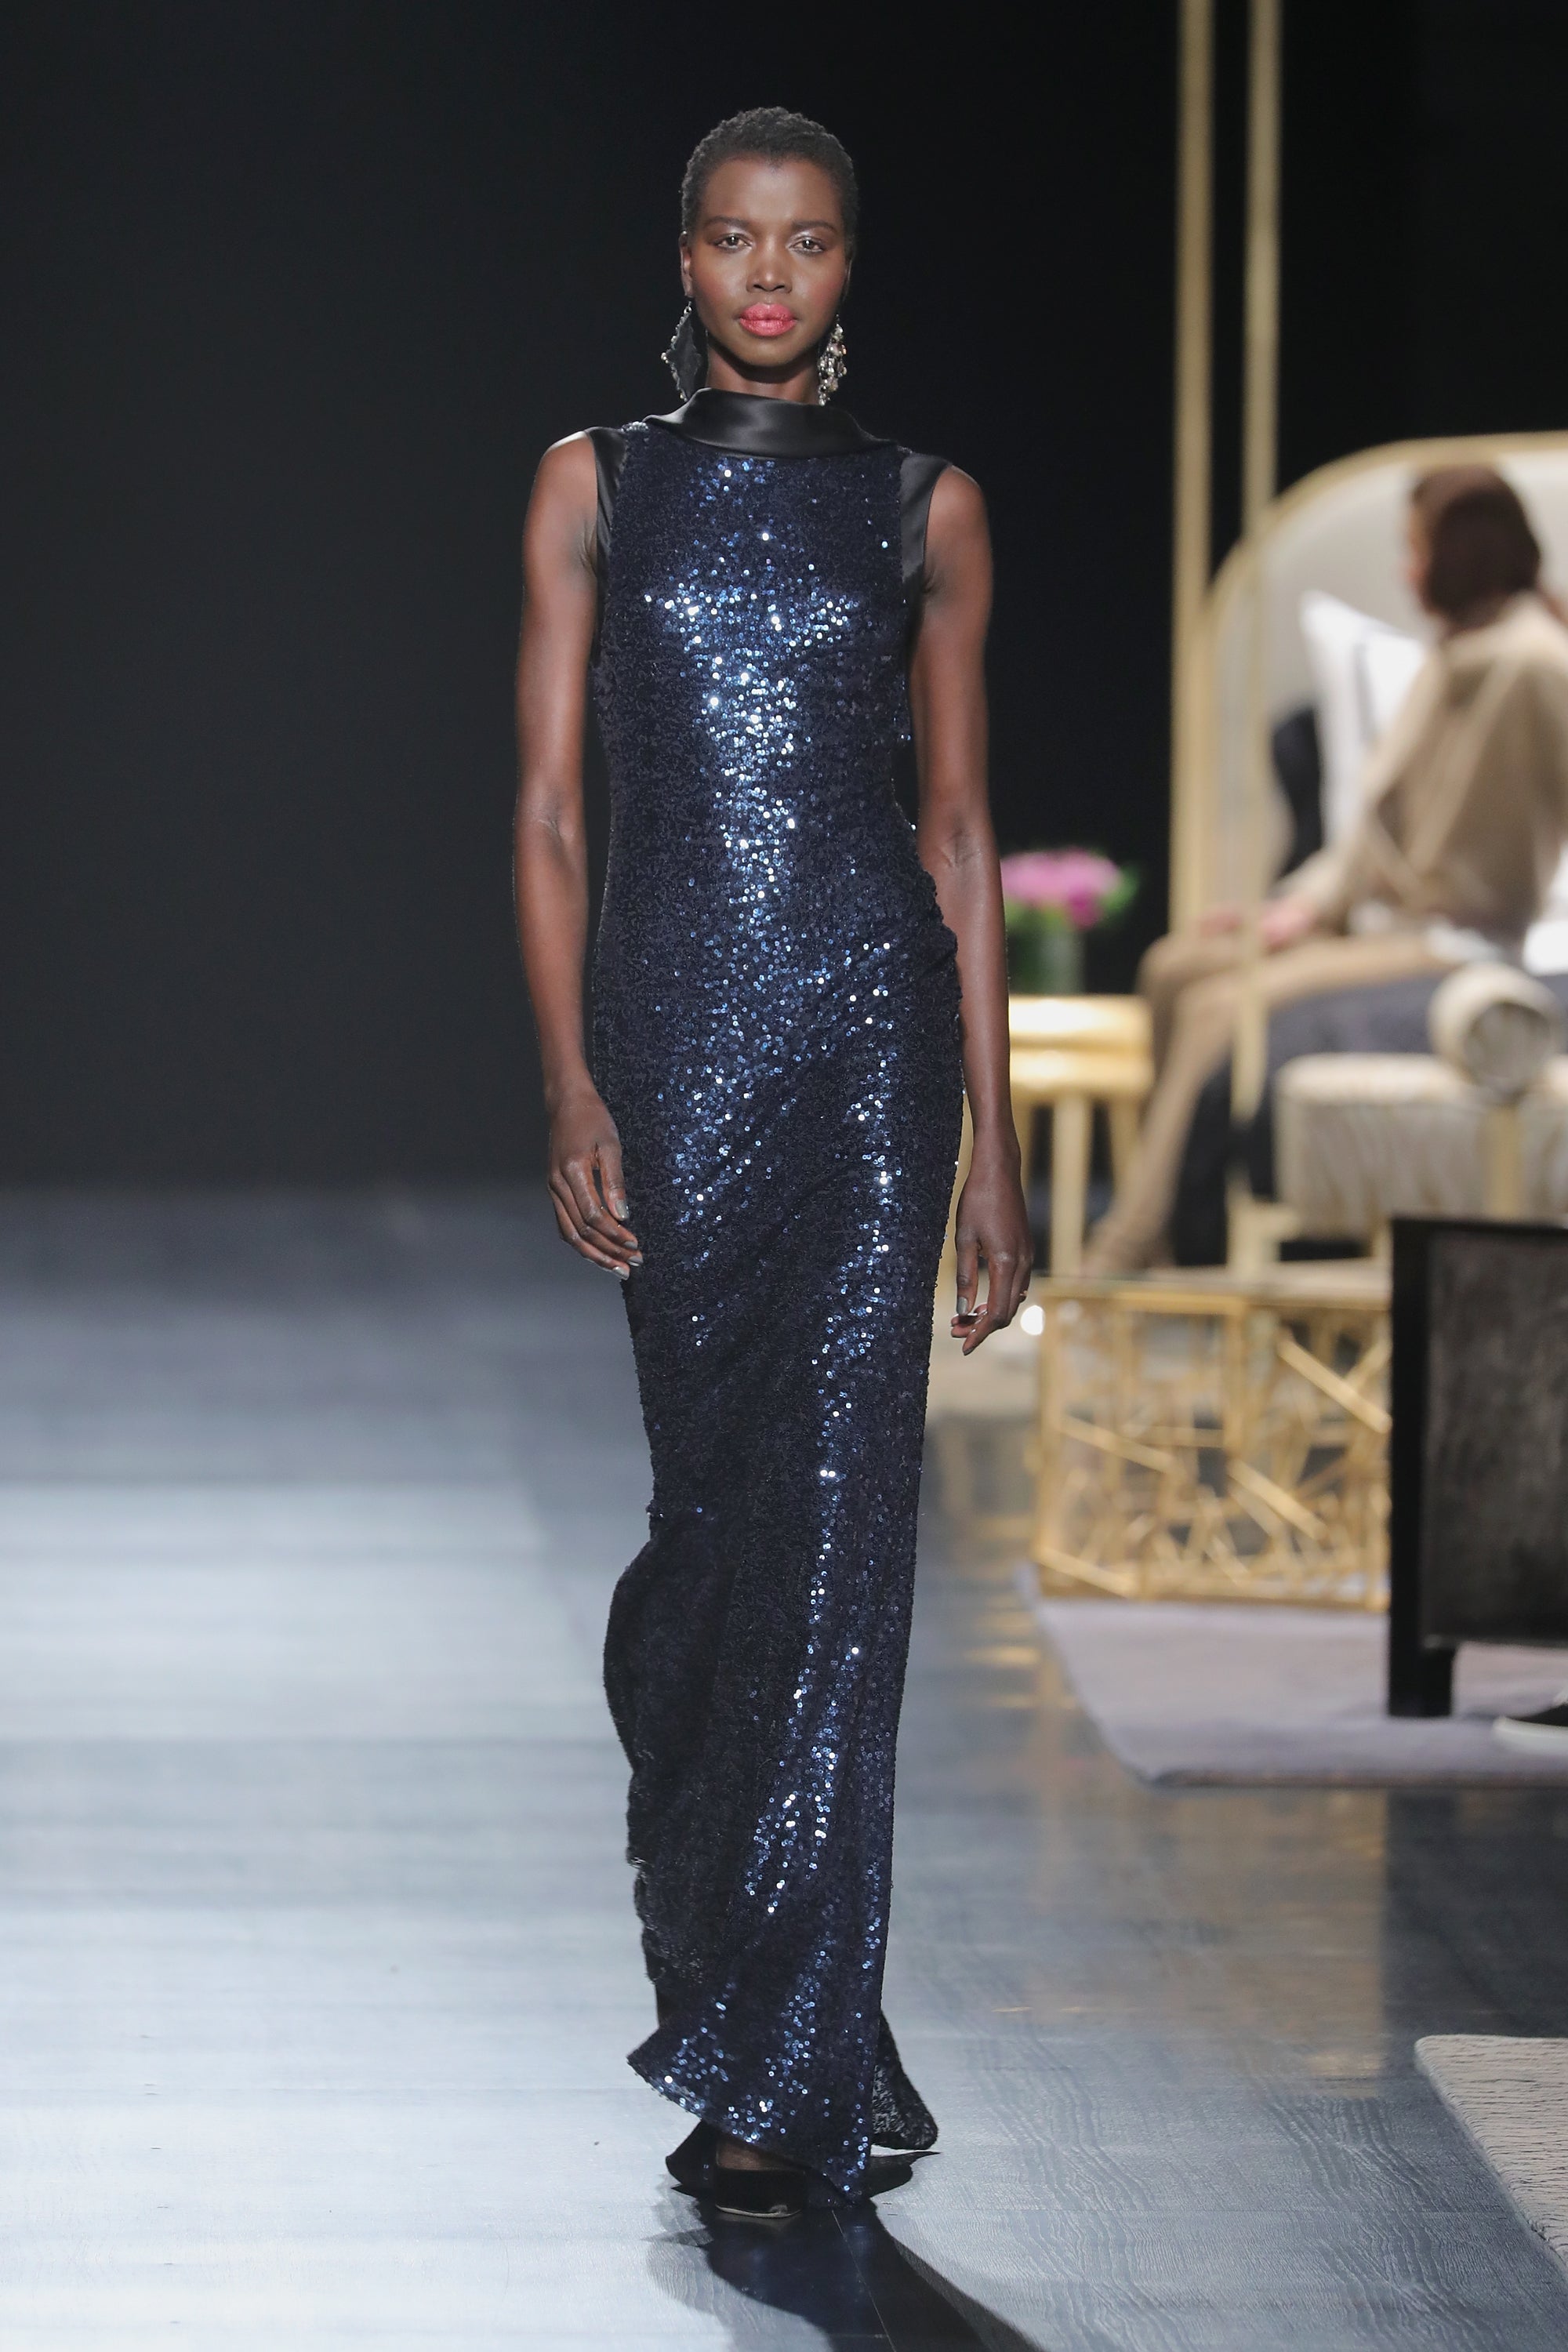 Every Beautiful Black Model on the Runway at New York Fashion Week
